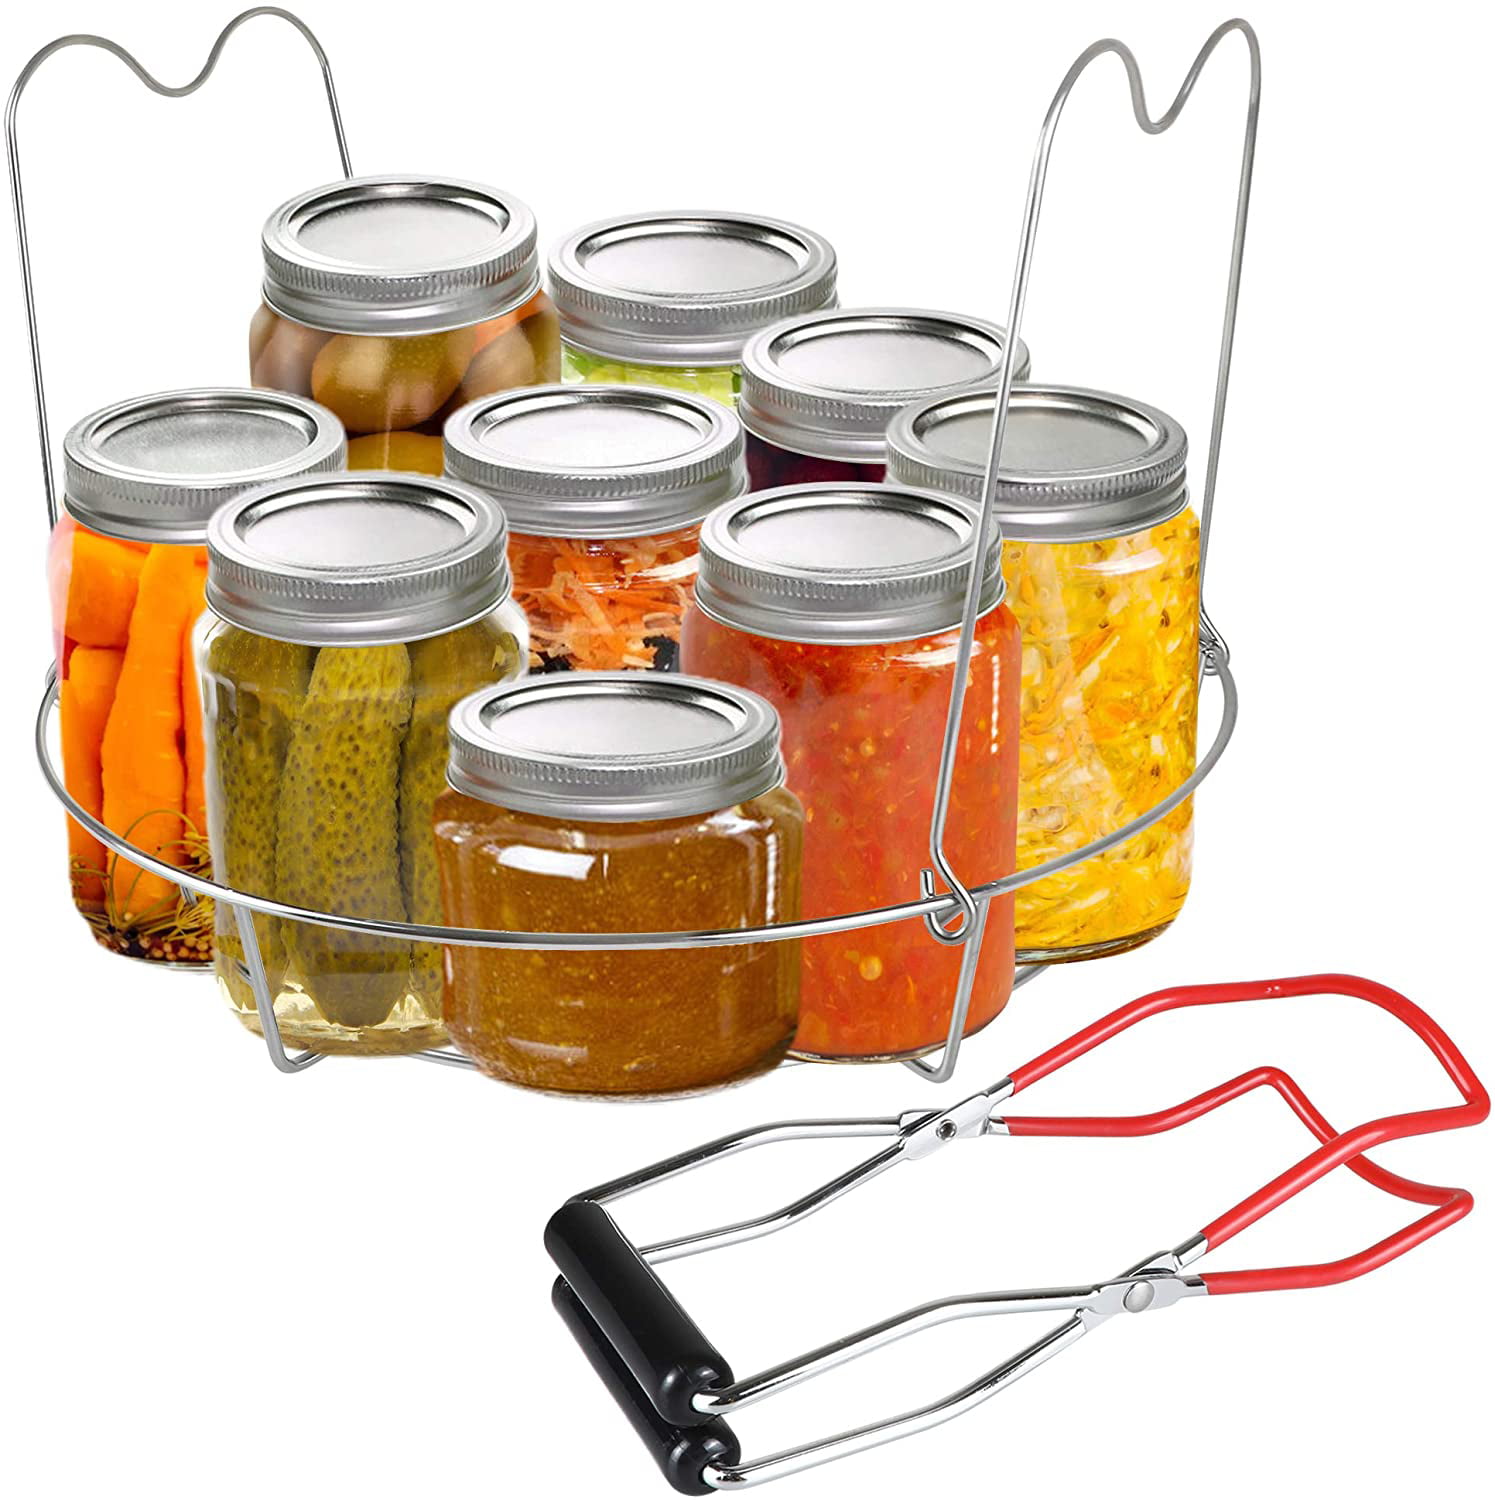 Canning Supplies - Canning Kit with Canning Rack, Canning tools and  Equipment - Canning Set: Canning Funnel, Jar Lifter, Tongs and more Canning